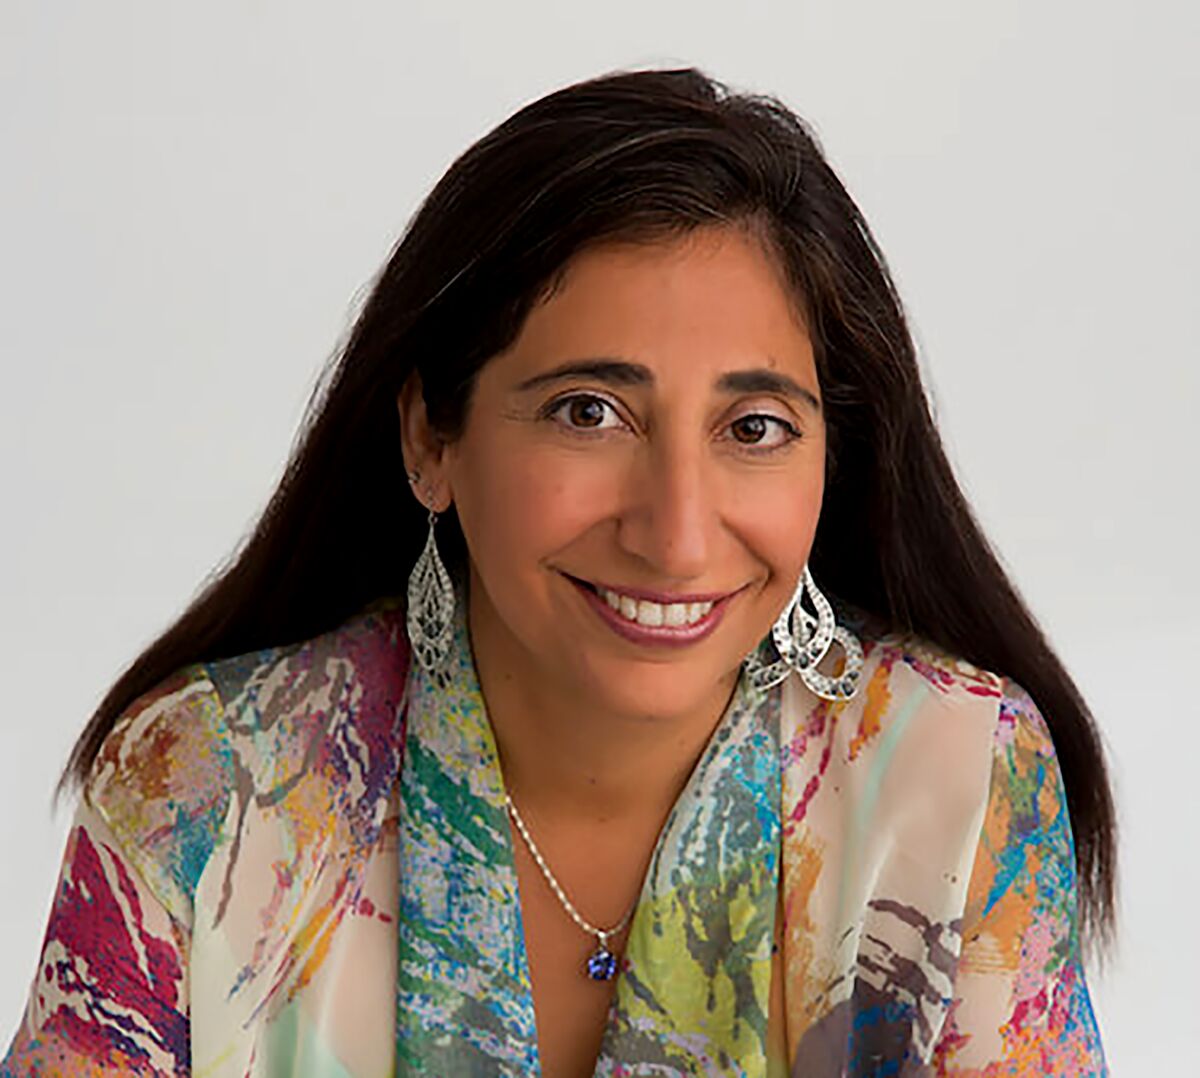 Dr. Azmaira Maker, a licensed clinical psychologist, is the founder of Aspiring Families Center for Mental Health and Wellness, located in the Del Mar/Carmel Valley area, at 12625 High Bluff Drive, Suite 105, San Diego. (858) 531-1122. aspiringfamilies.com